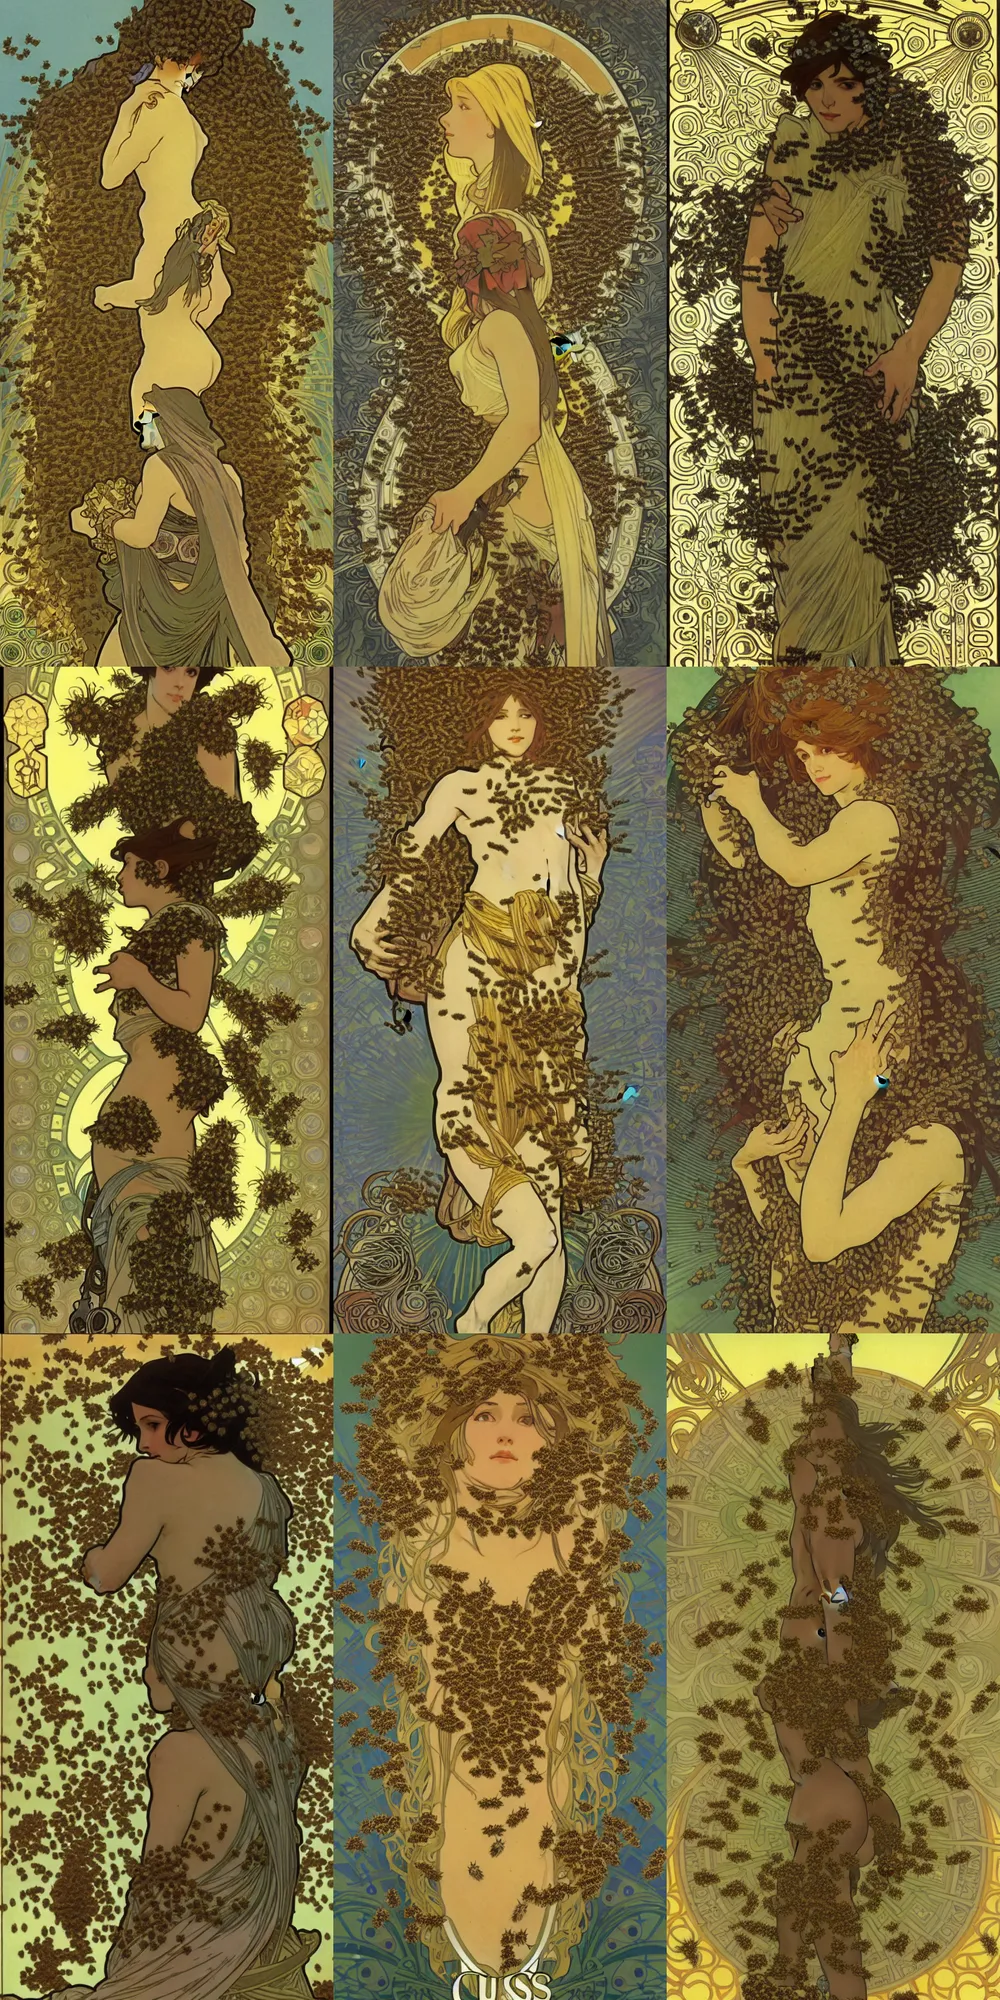 Prompt: screenshot, shadow of the colossus covered in bees, alphonse mucha